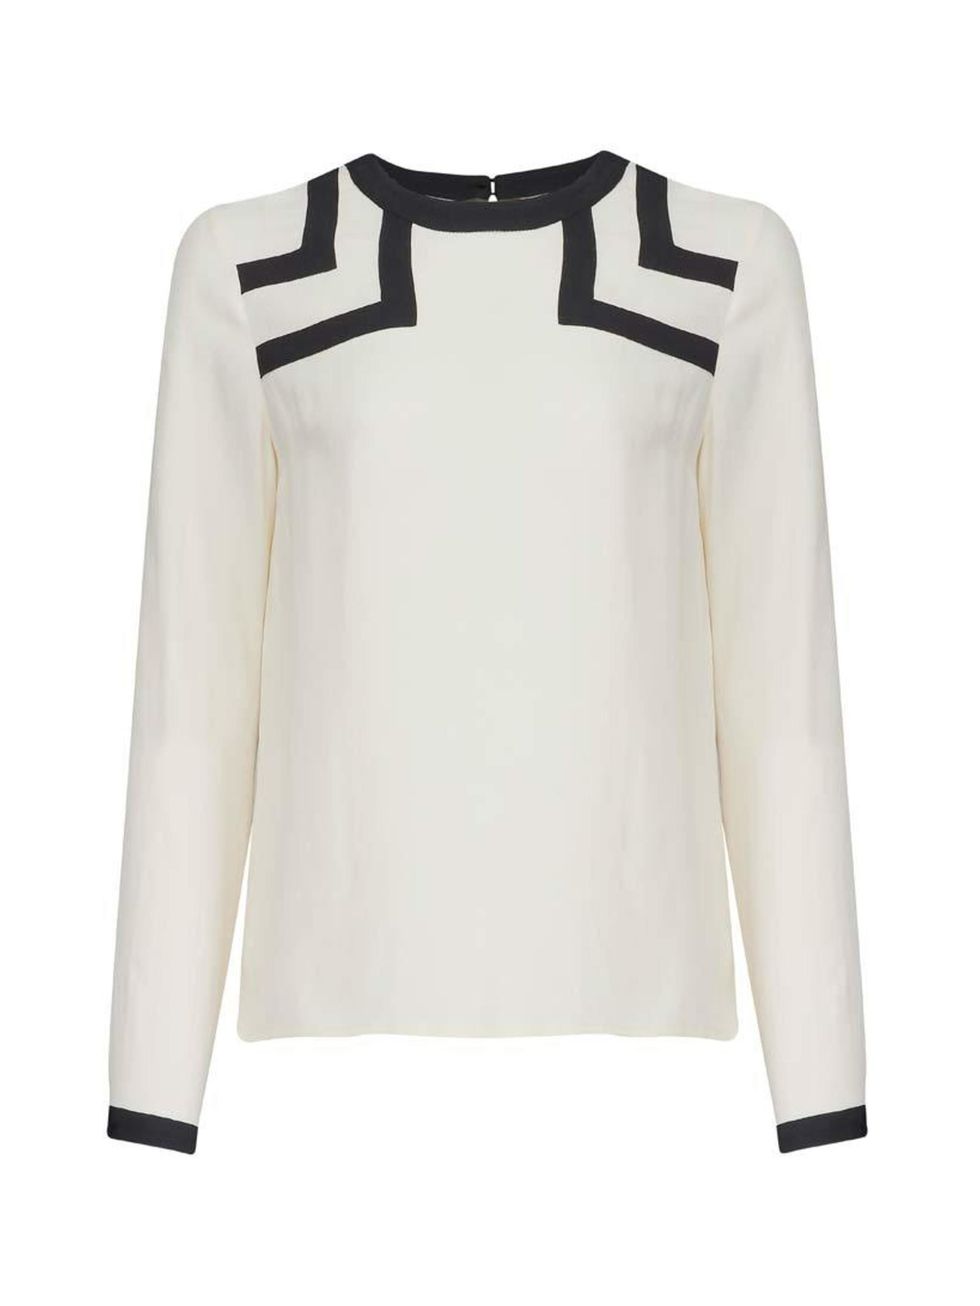 <p>For graphic summer workwear, try crisp monochrome.</p>

<p><a href="http://www.atterleyroad.com/cream-colour-block-panel-blouse.html" target="_blank">Atterley Road</a> top, £48</p>